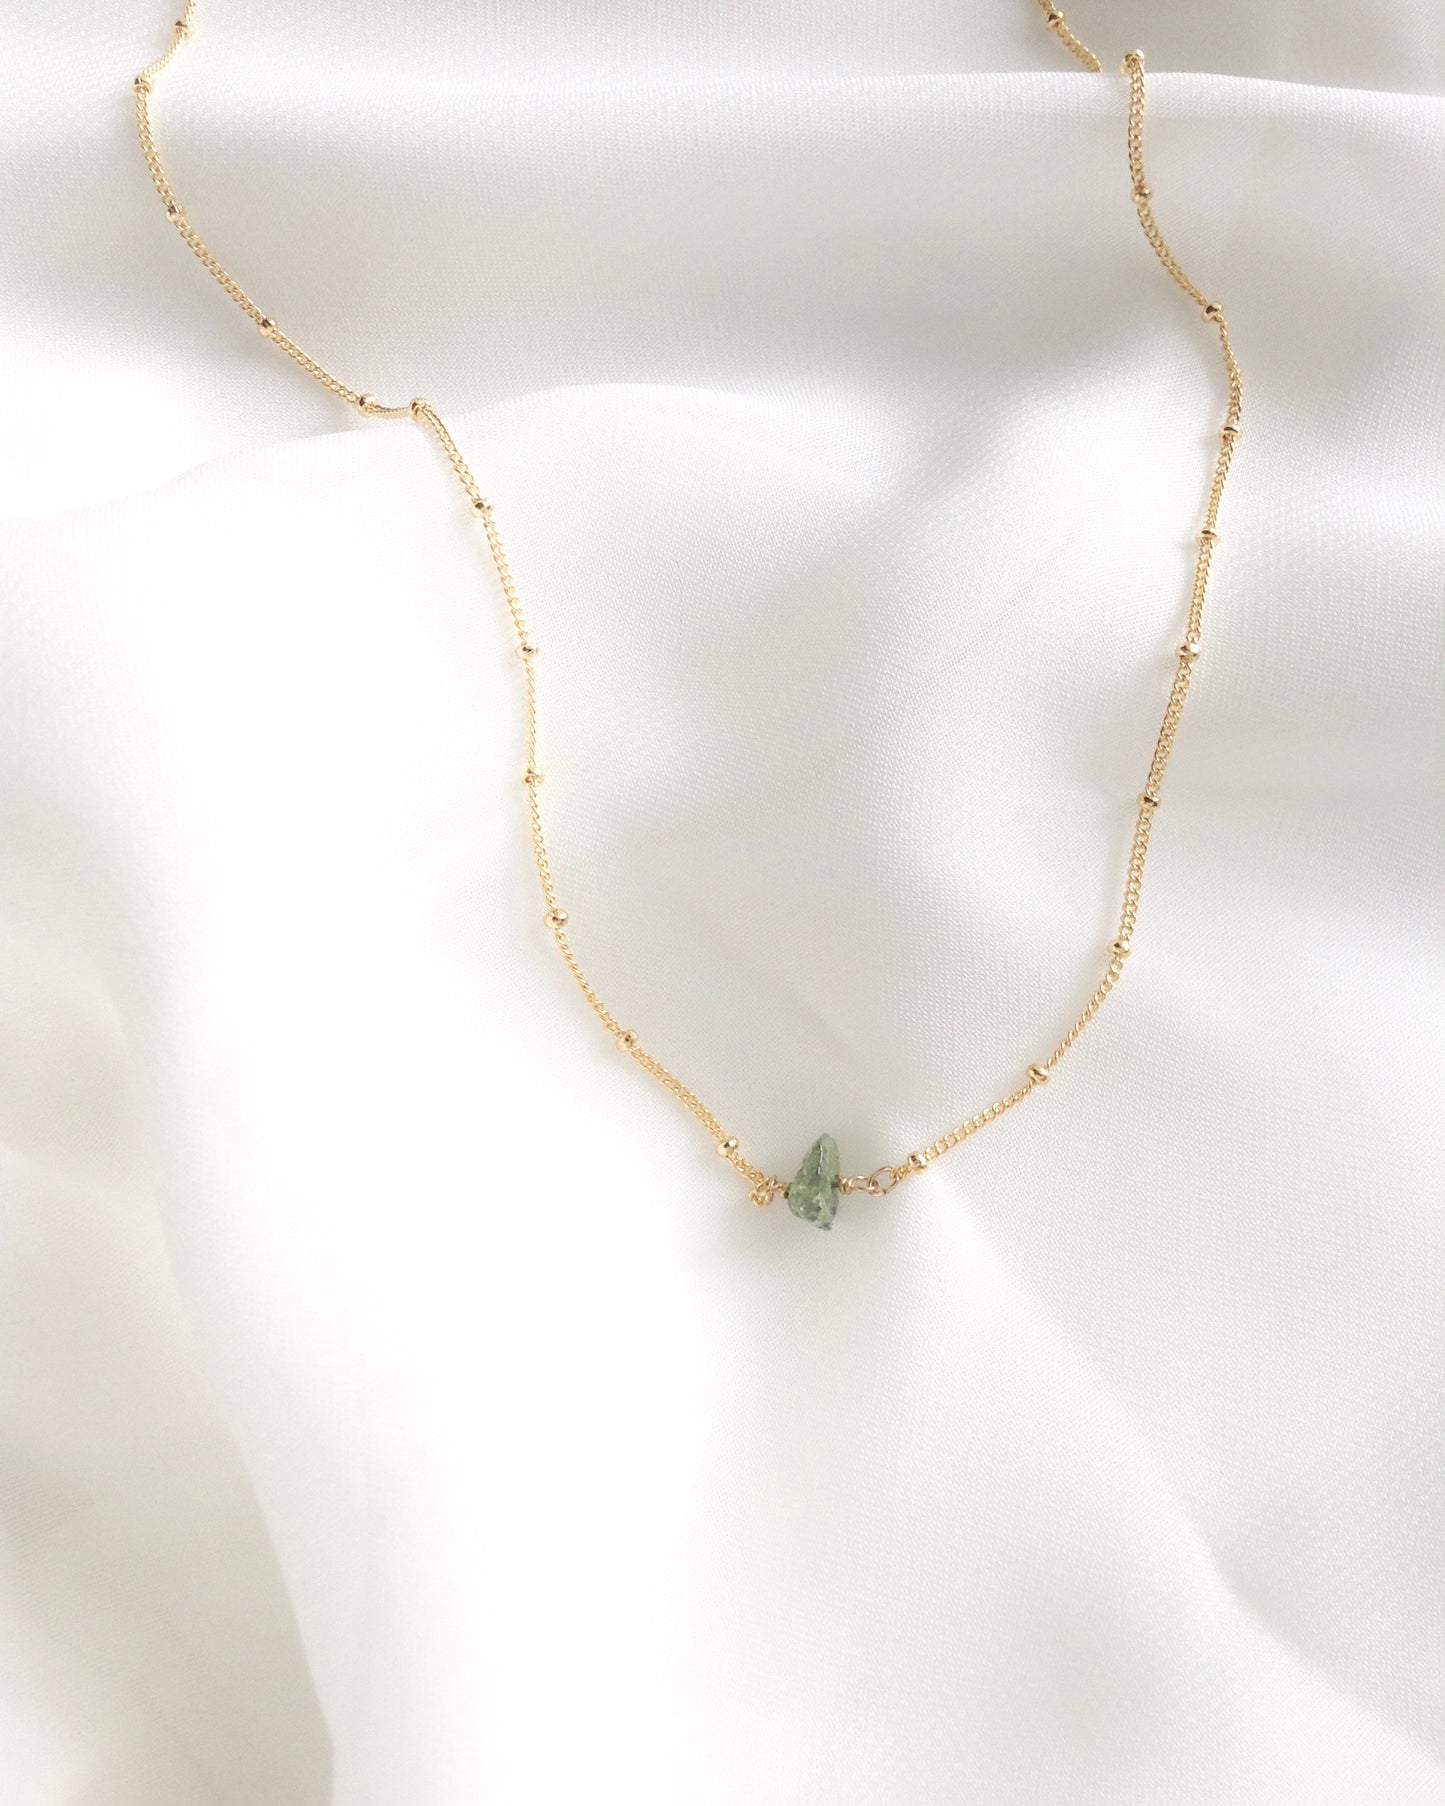 Minimalist Emerald Necklace in Gold Filled or Sterling Silver | IB Jewelry